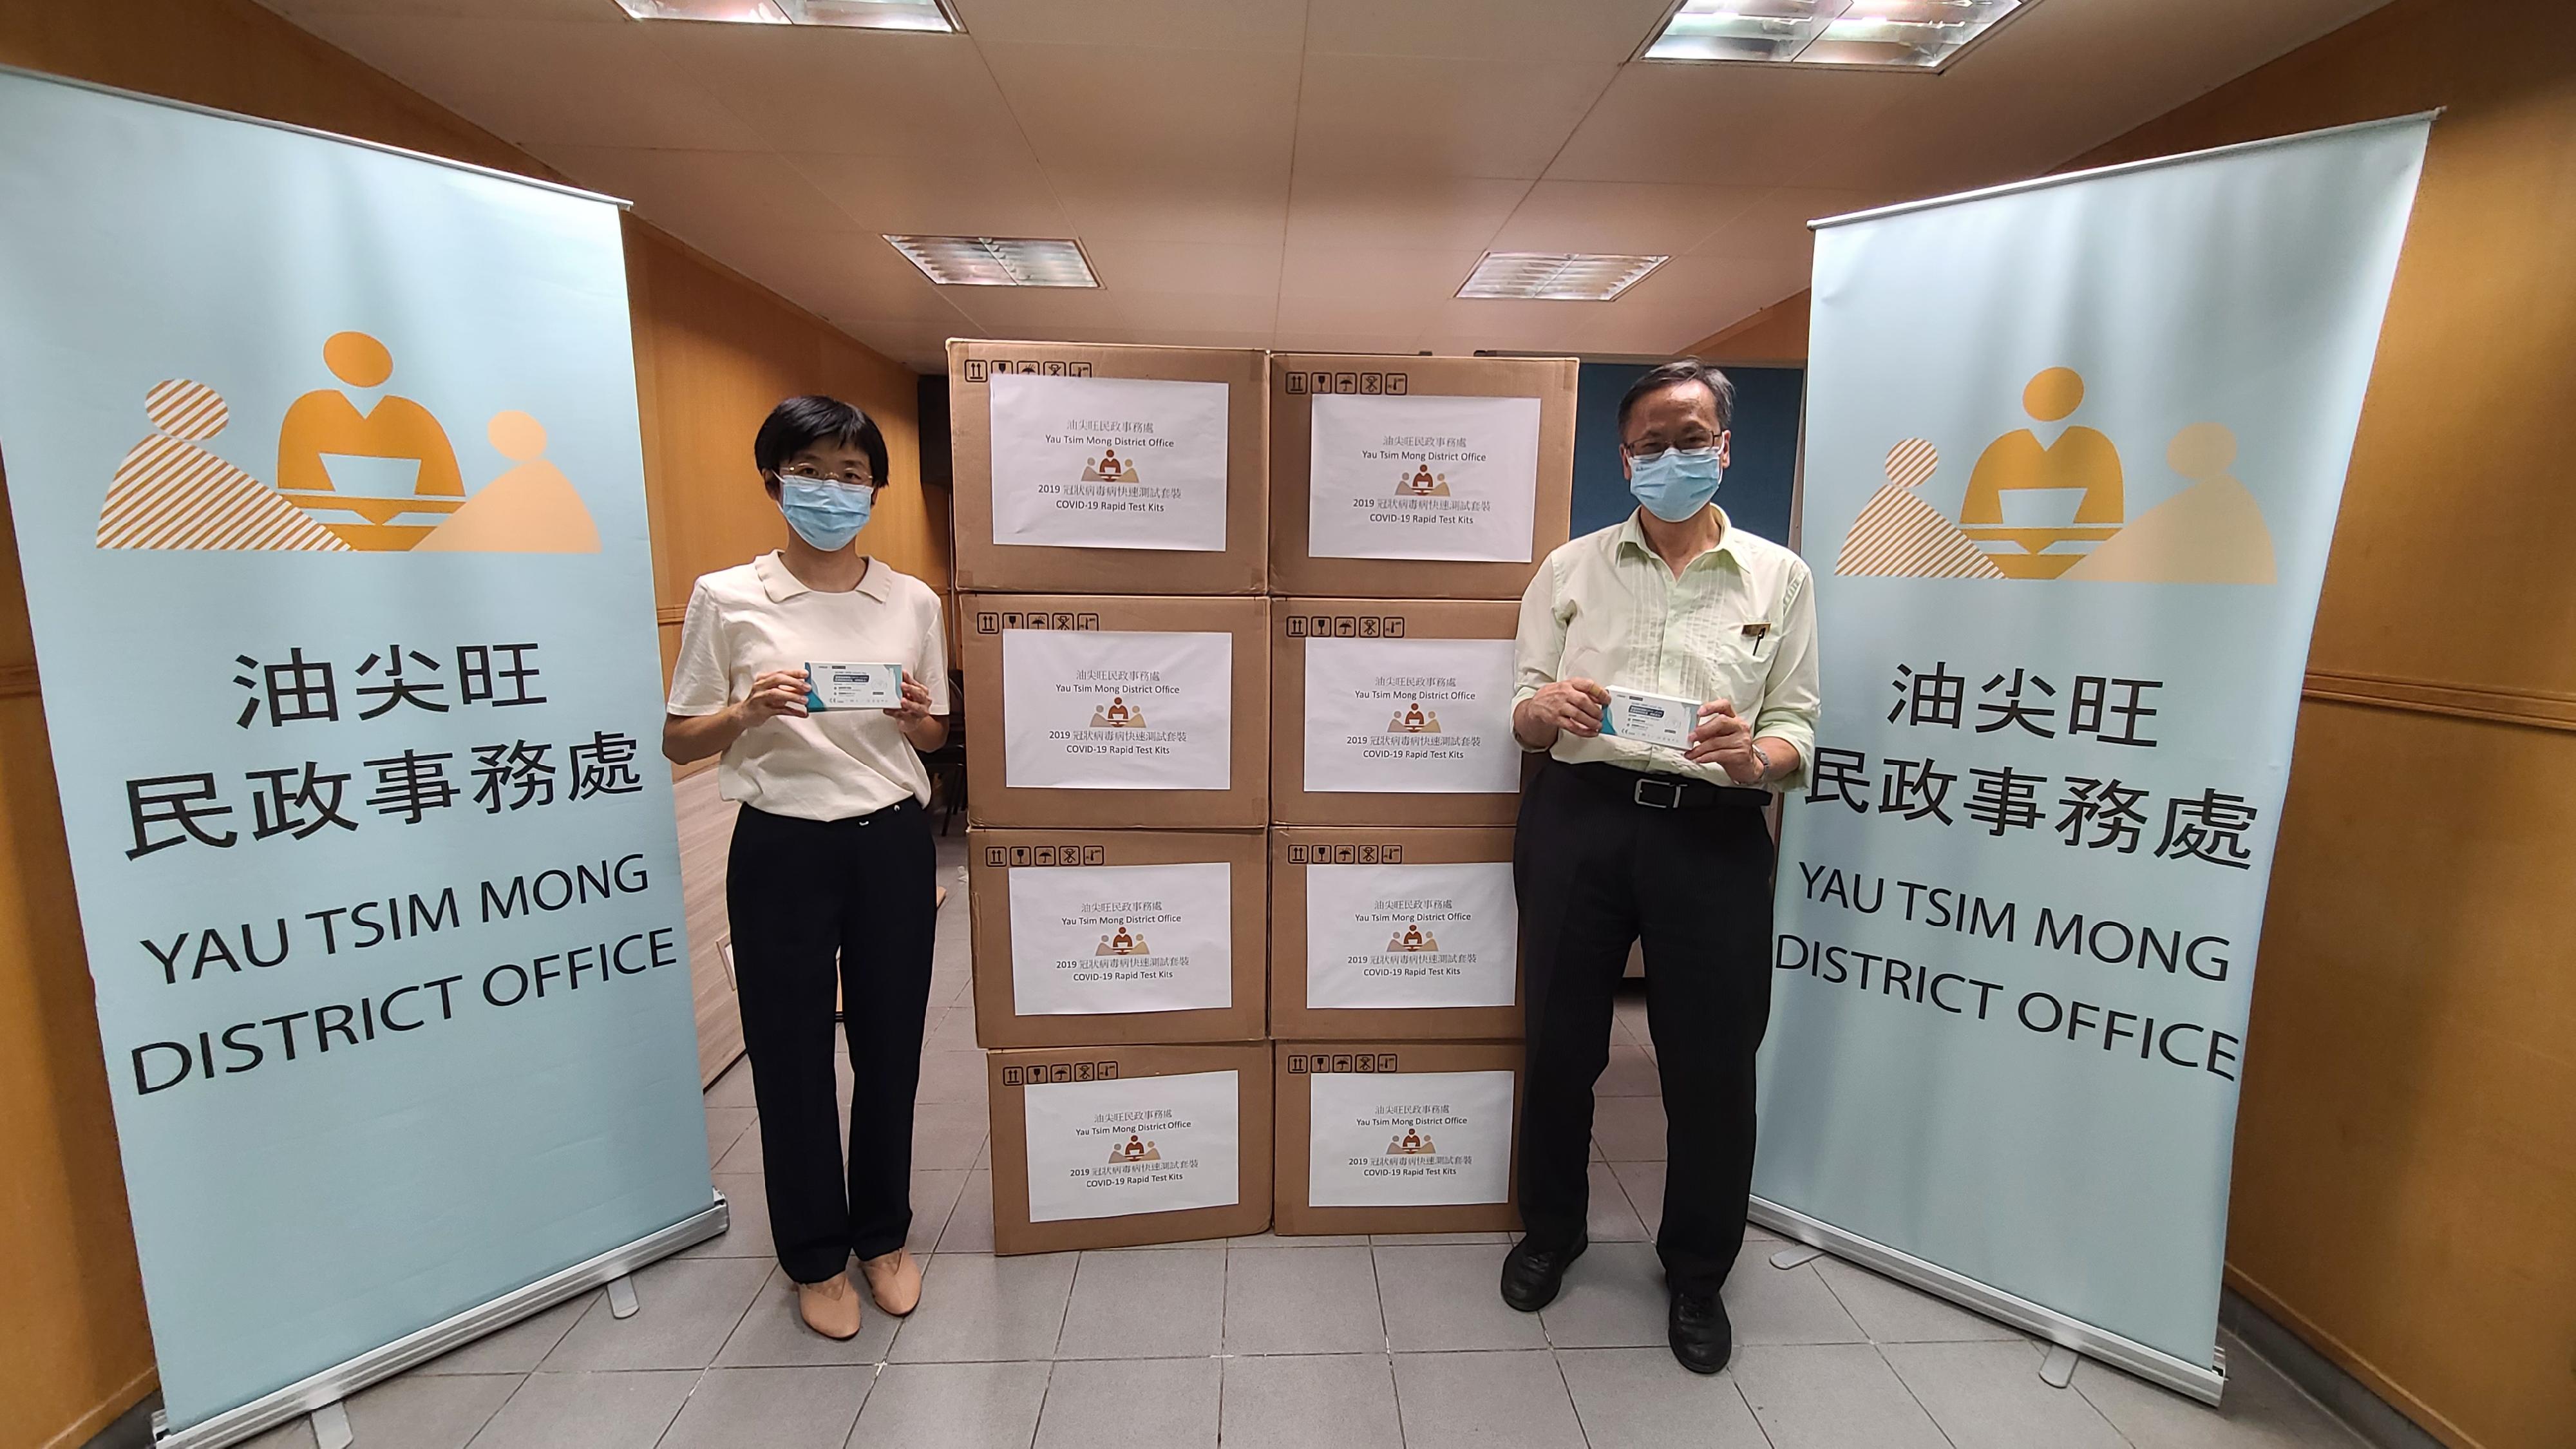 The Yau Tsim Mong District Office today (July 28) distributed COVID-19 rapid test kits to households, cleansing workers and property management staff living and working in King's Park Villa for voluntary testing through the property management company.